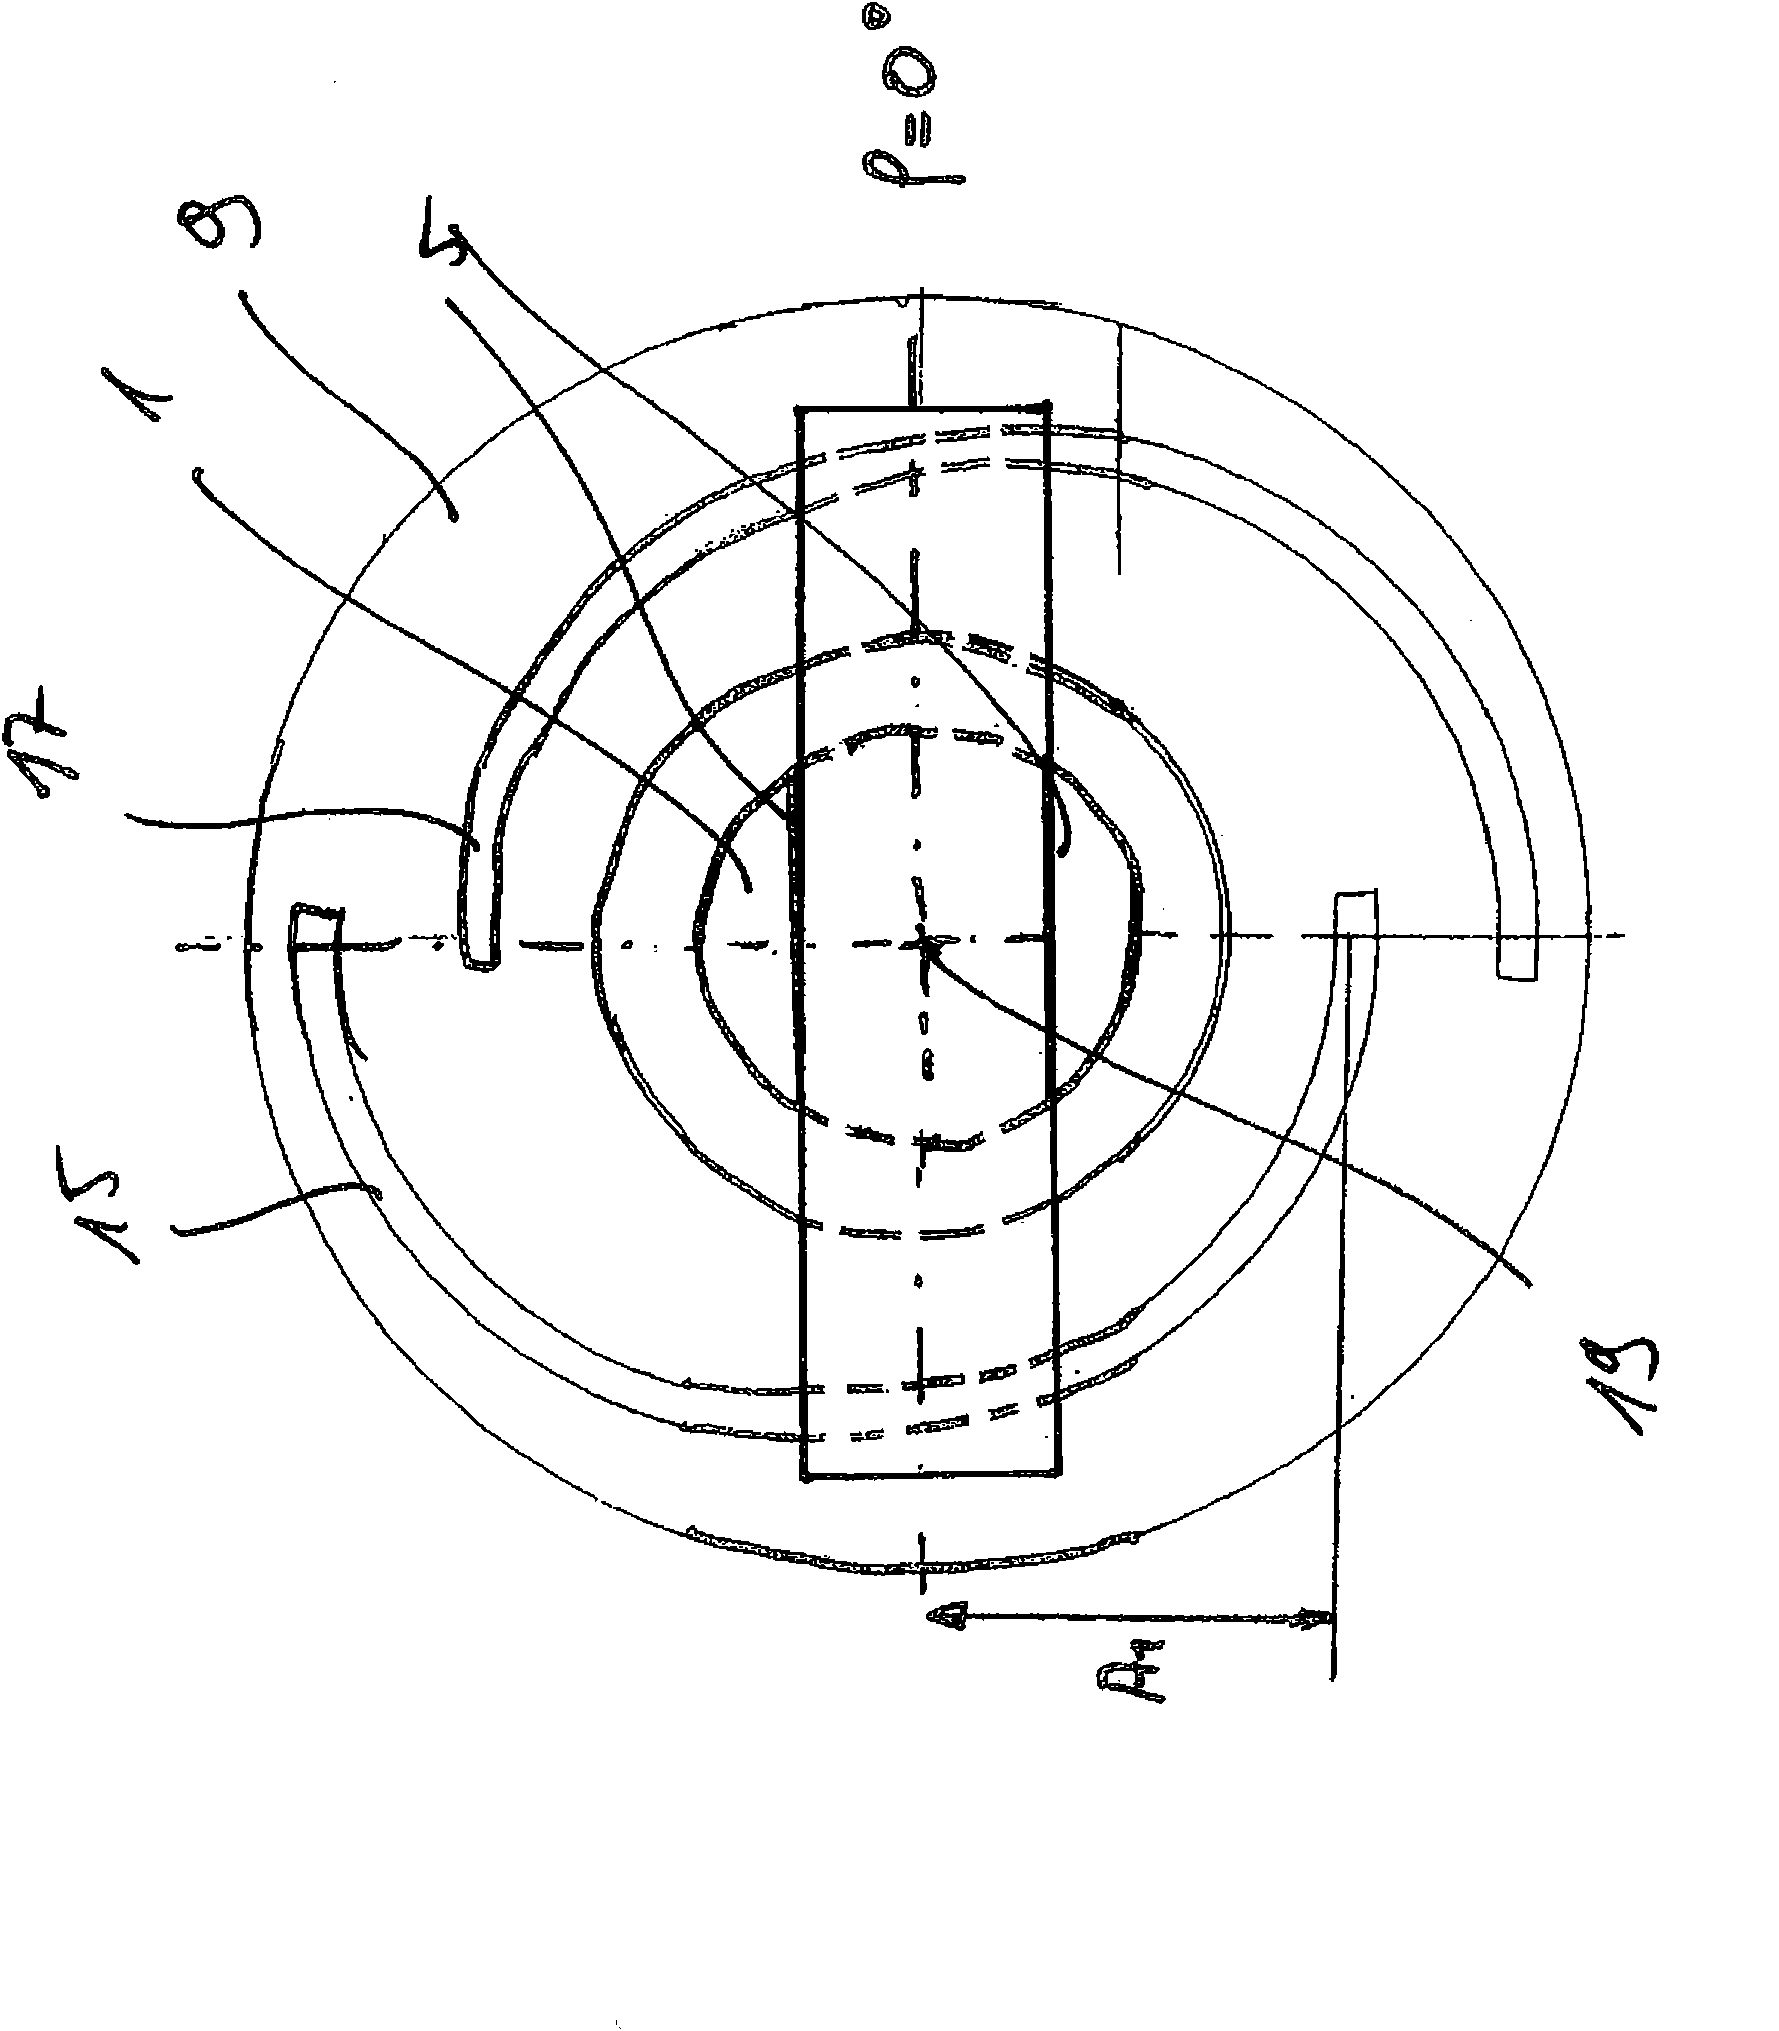 Adjustable eccentric transmission device for machine tool, in particular for superfinishing or honing